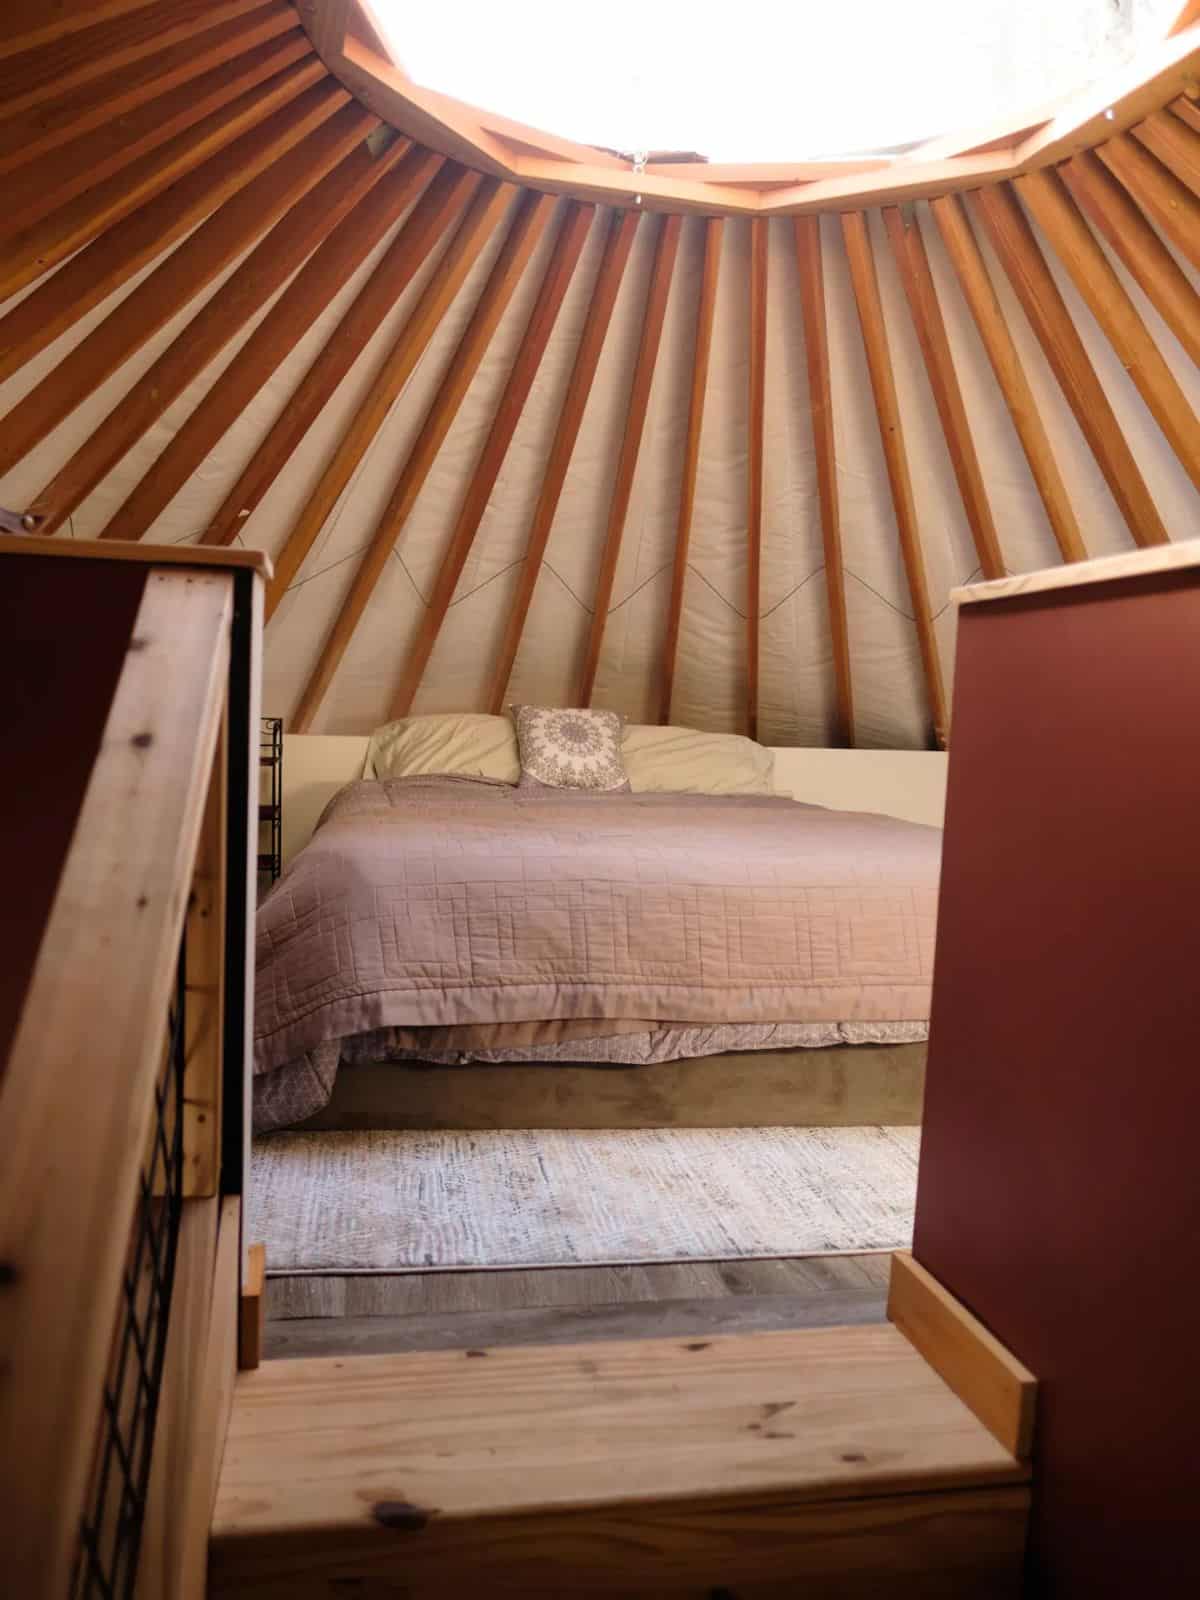 steps to bed just below opening in center of yurt